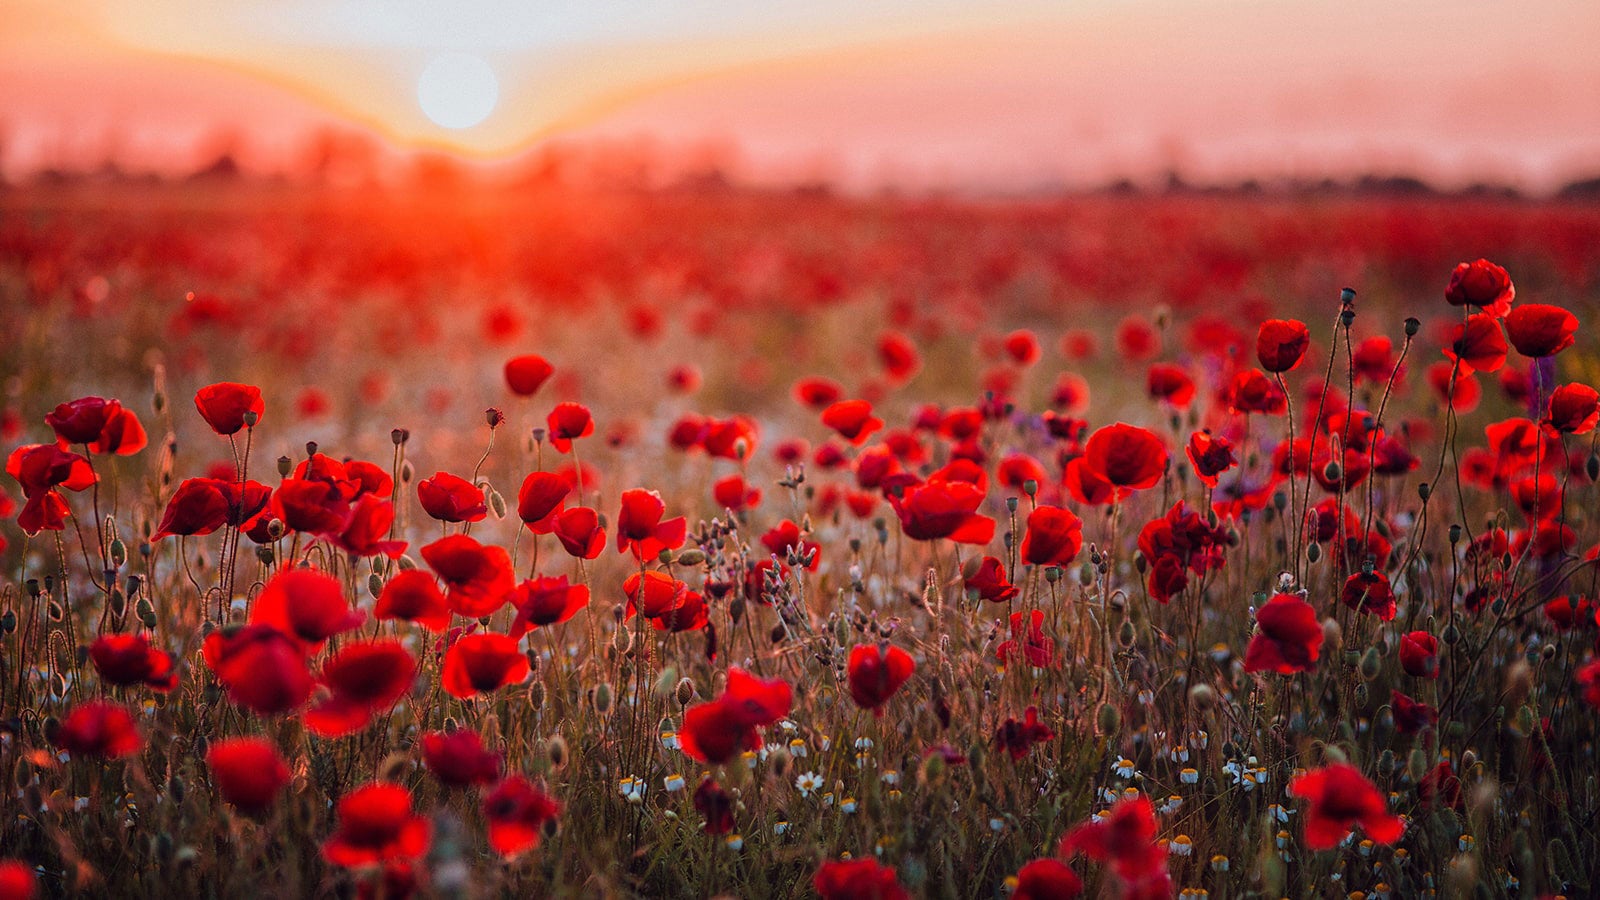 Poppies in a field with a red setting sun in the background.